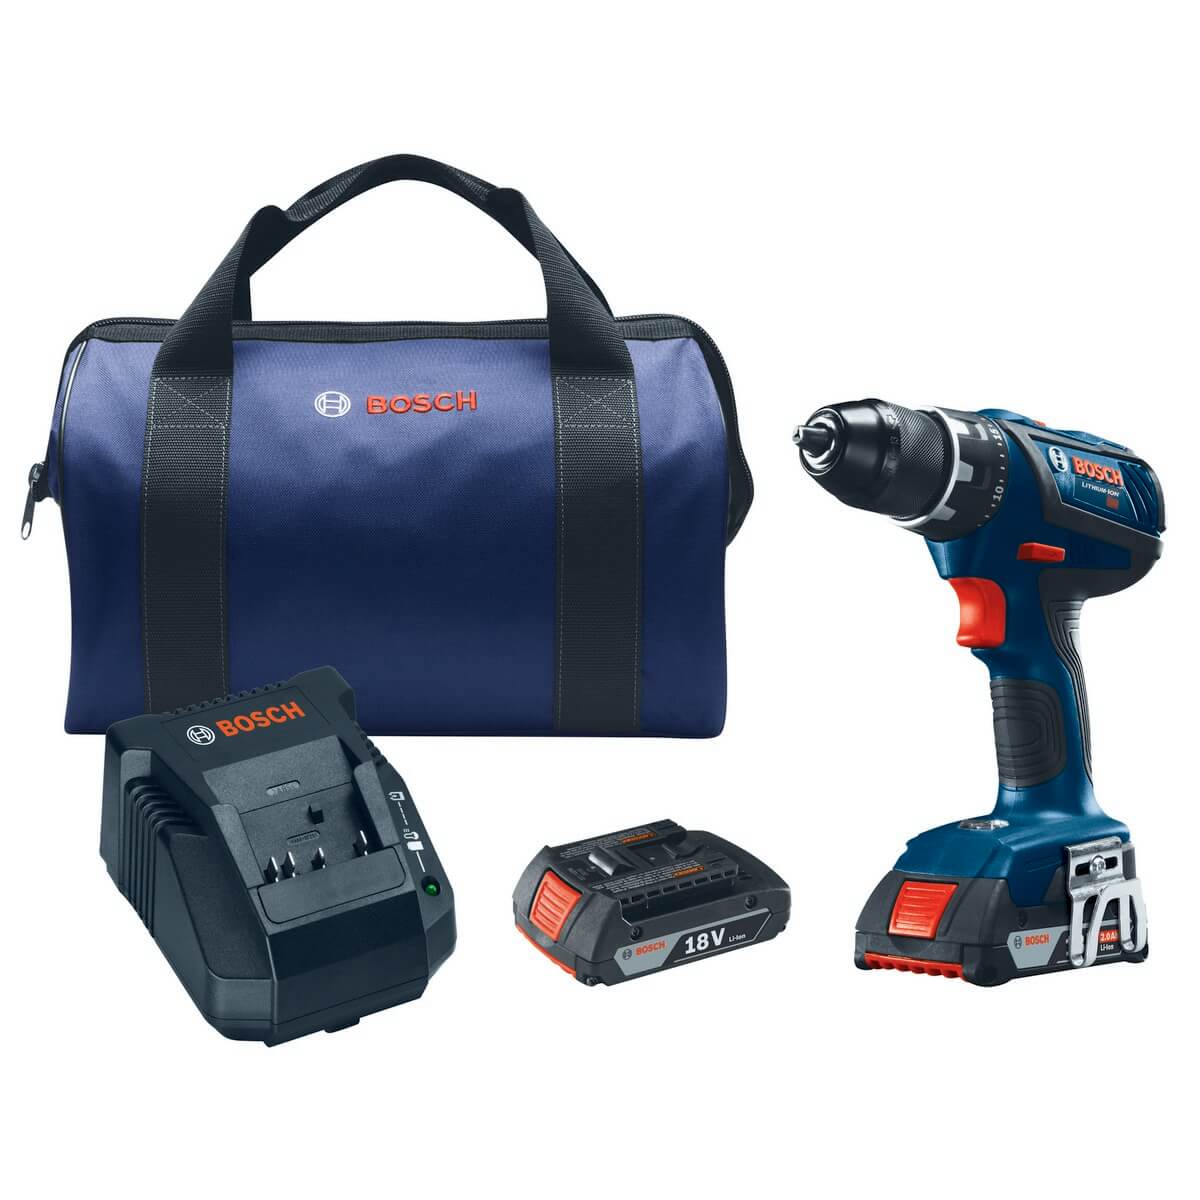 BOSCH, Bosch DDS181A-02 18V Compact Tough 1/2" Drill/Driver Kit with SlimPack Batteries